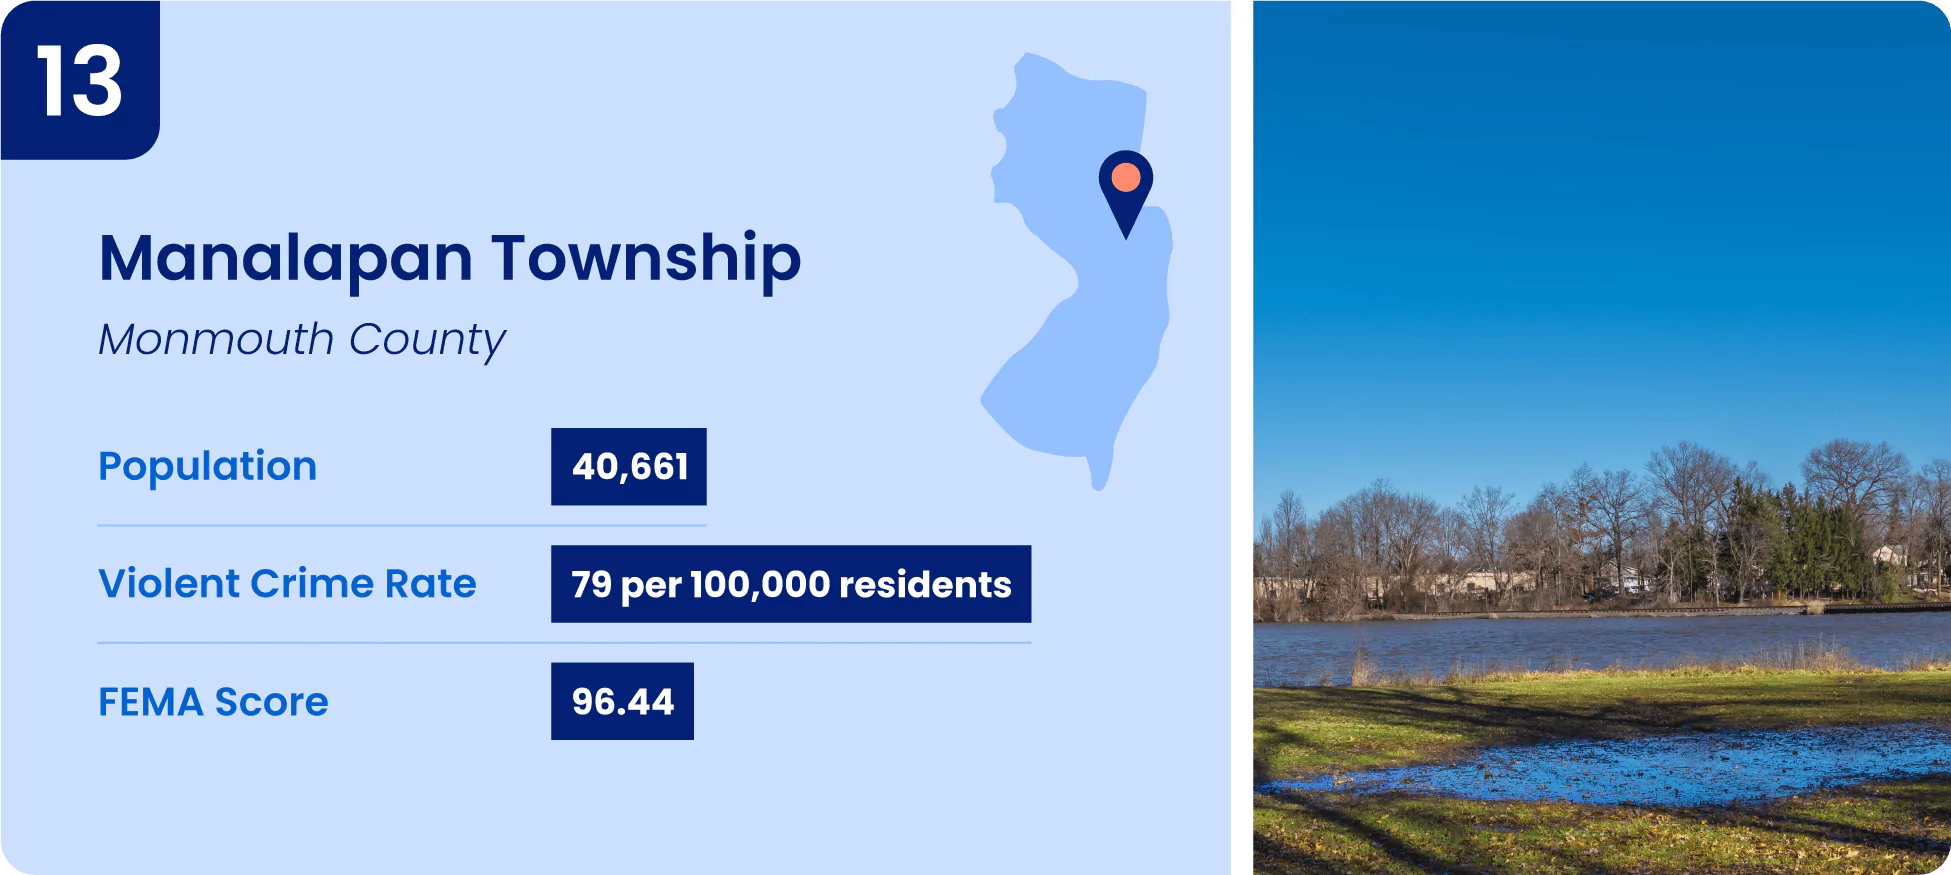 Image shows key information for one of the safest cities in New Jersey, Manalapan Township.